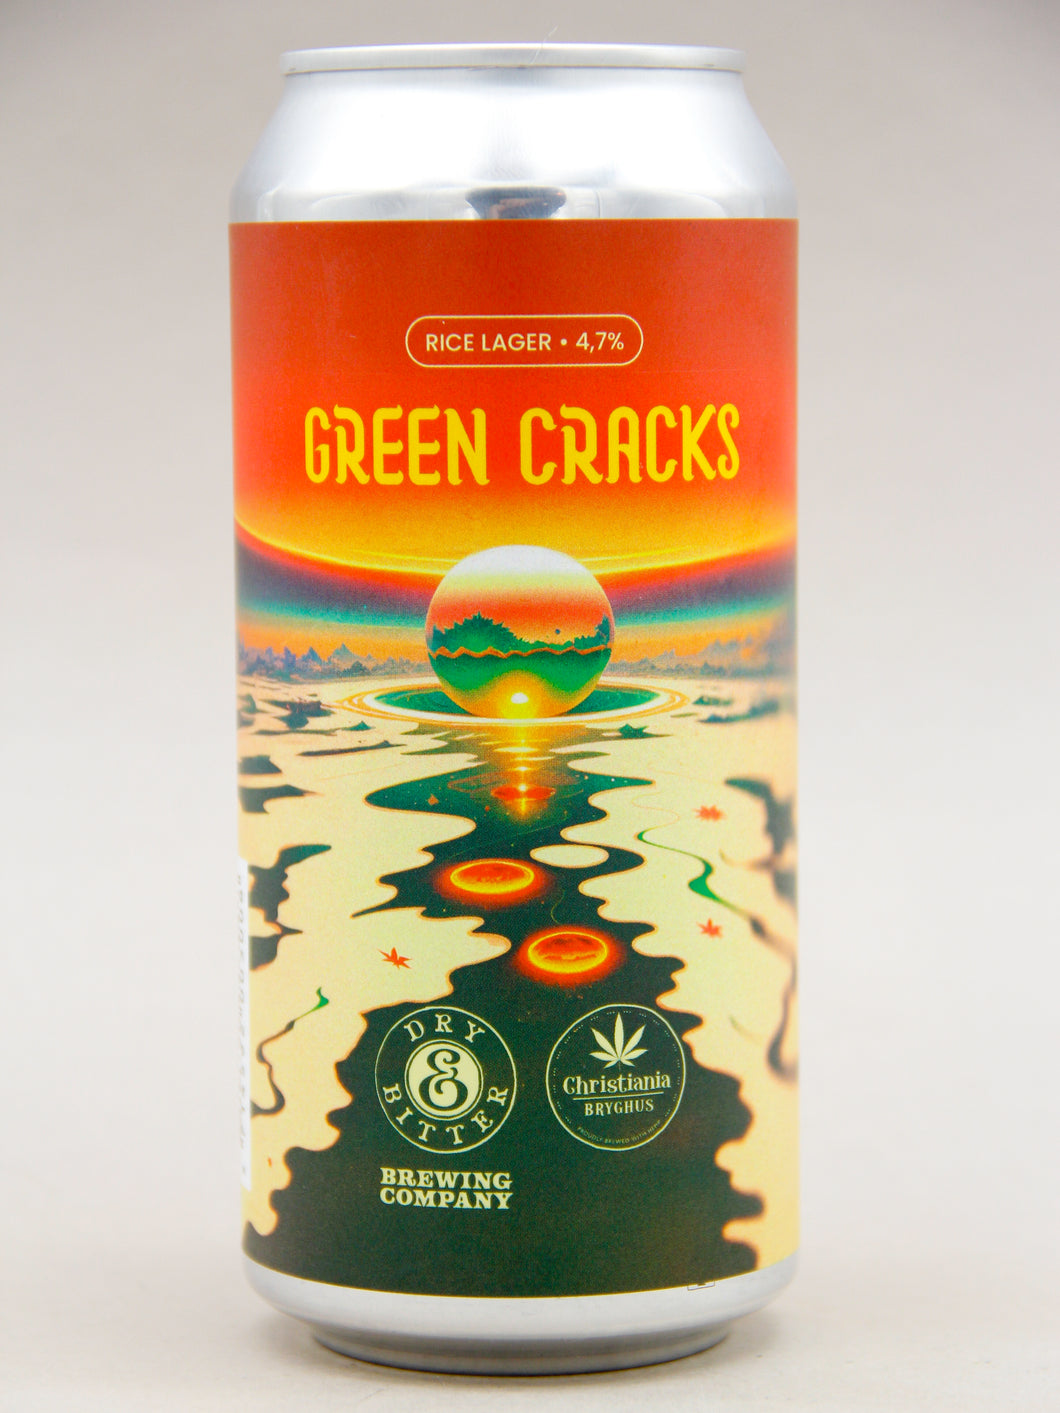 Dry & Bitter x Christiania Bryghus: Green Cracks, Rice Lager (4.7%, 44cl CAN)